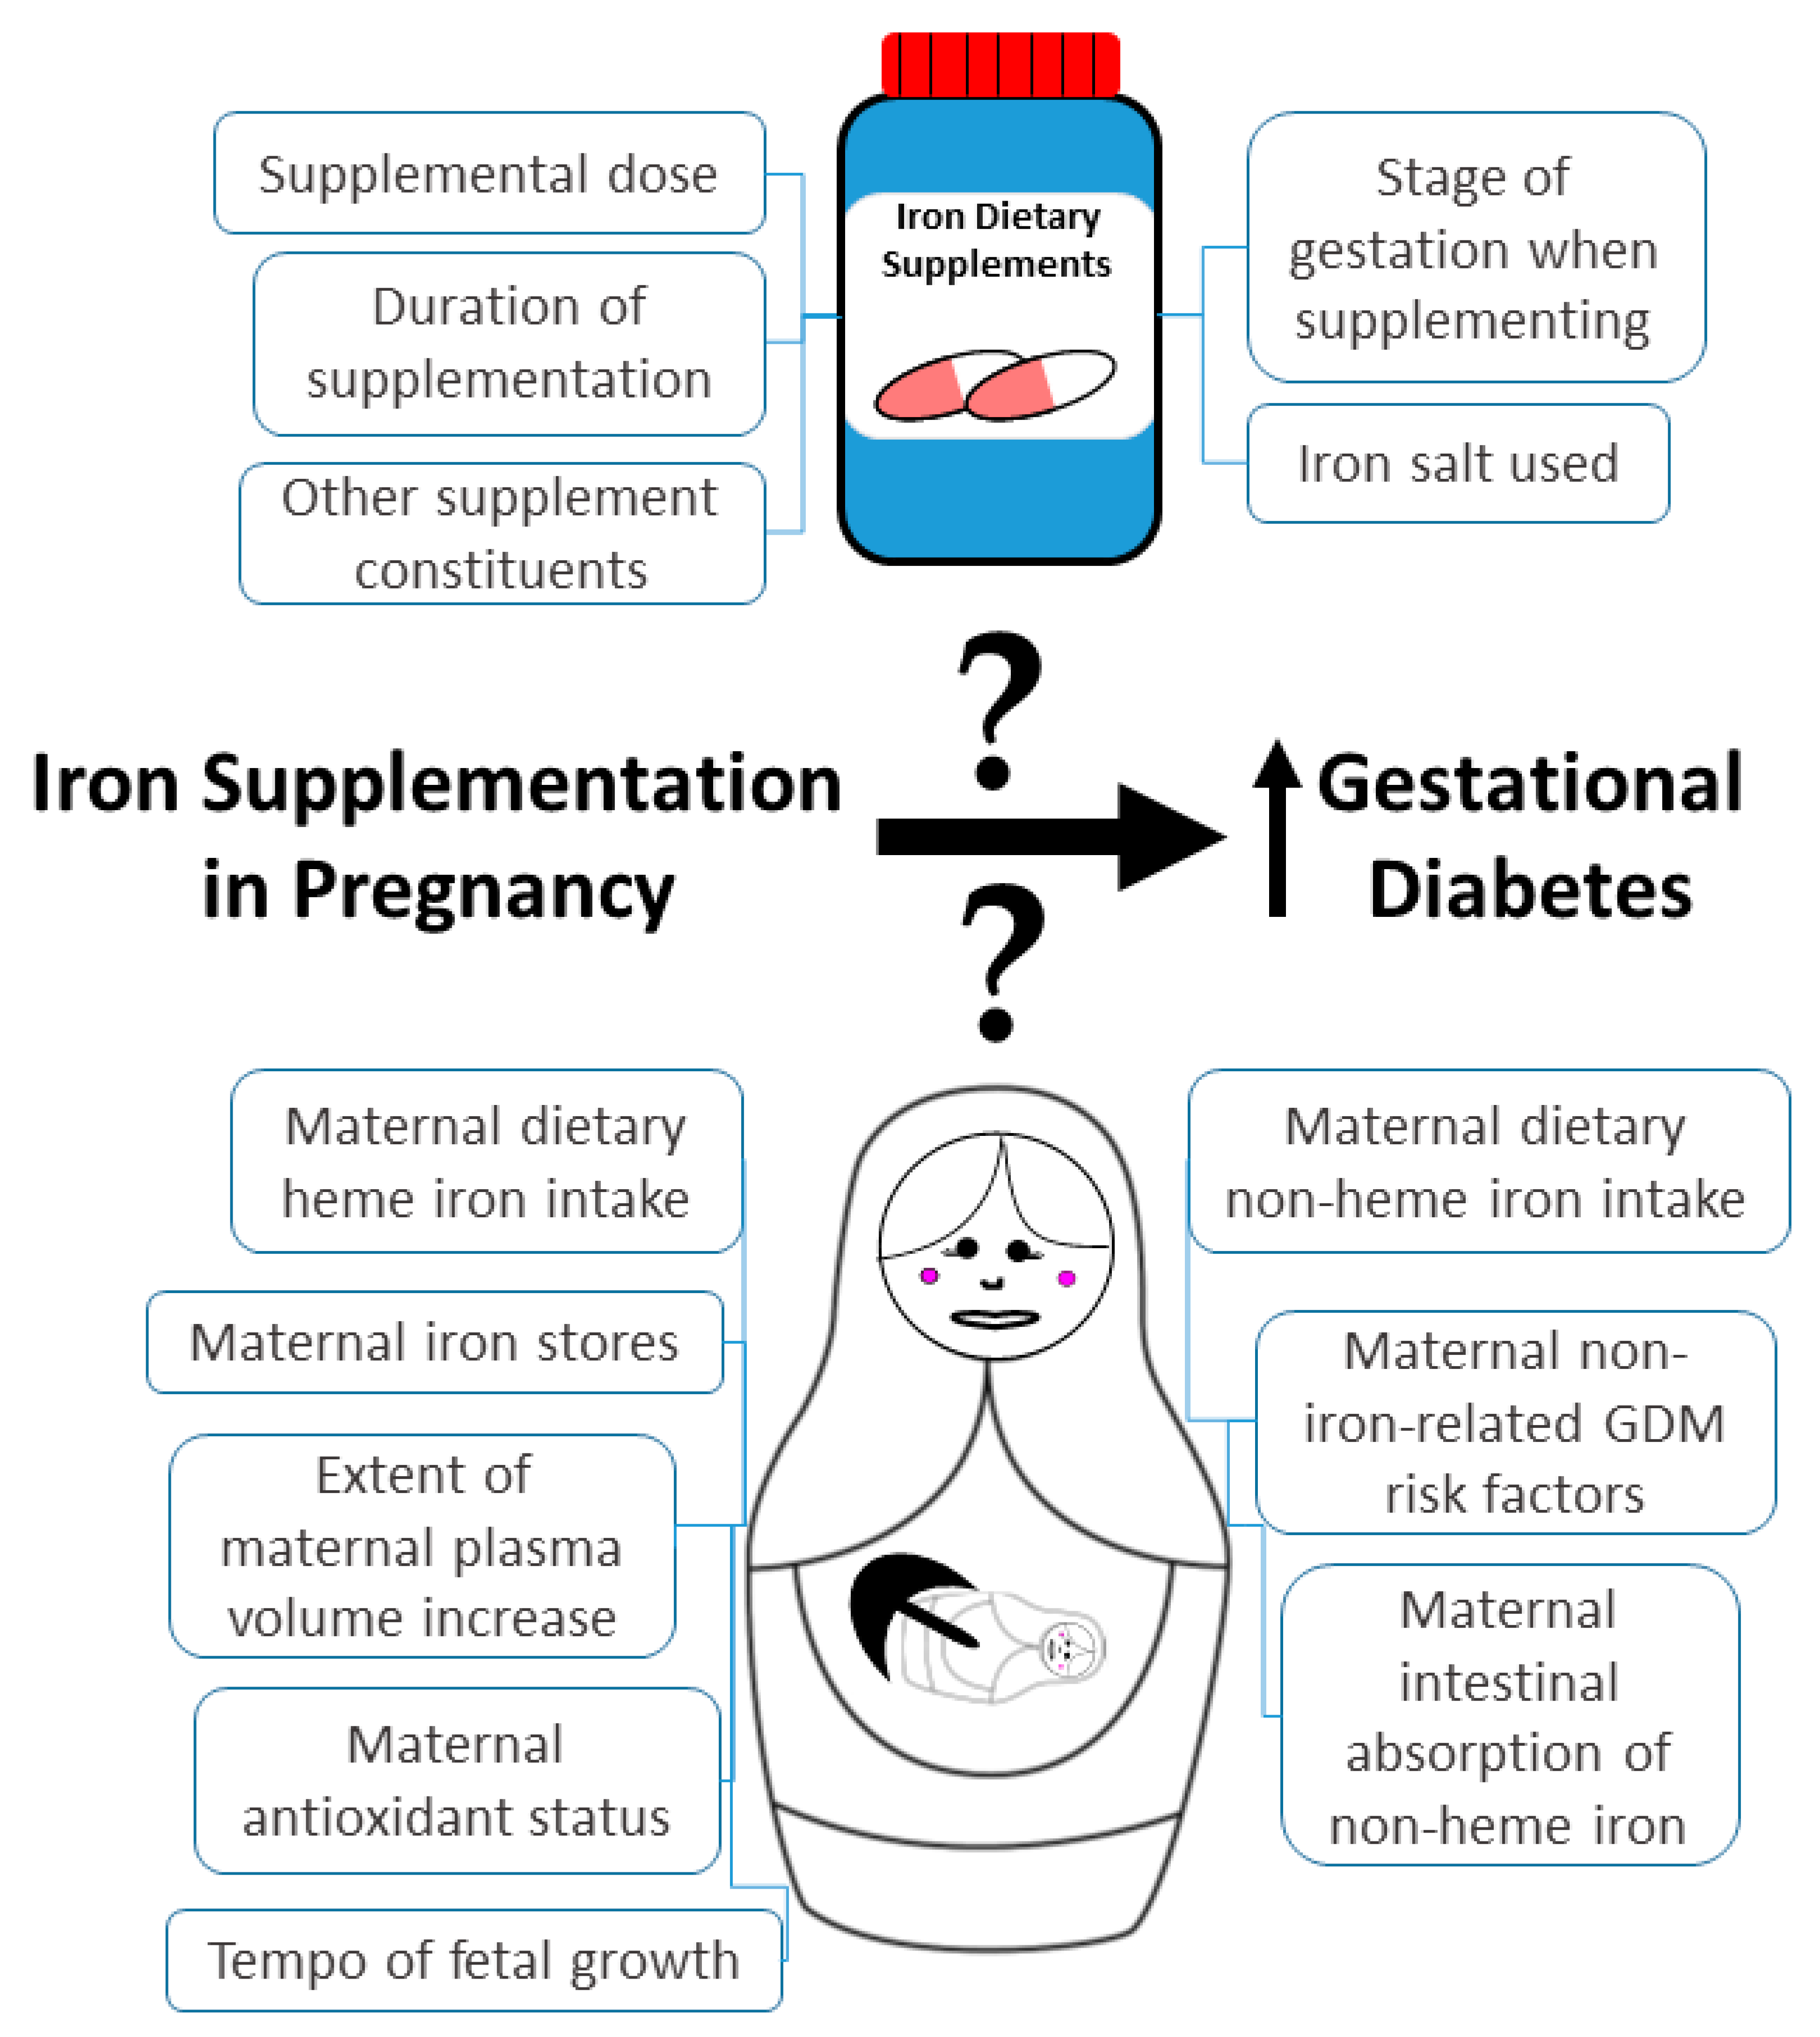 Nutrients | Free Full-Text | Iron Supplementation in Pregnancy and Risk of  Gestational Diabetes: A Narrative Review